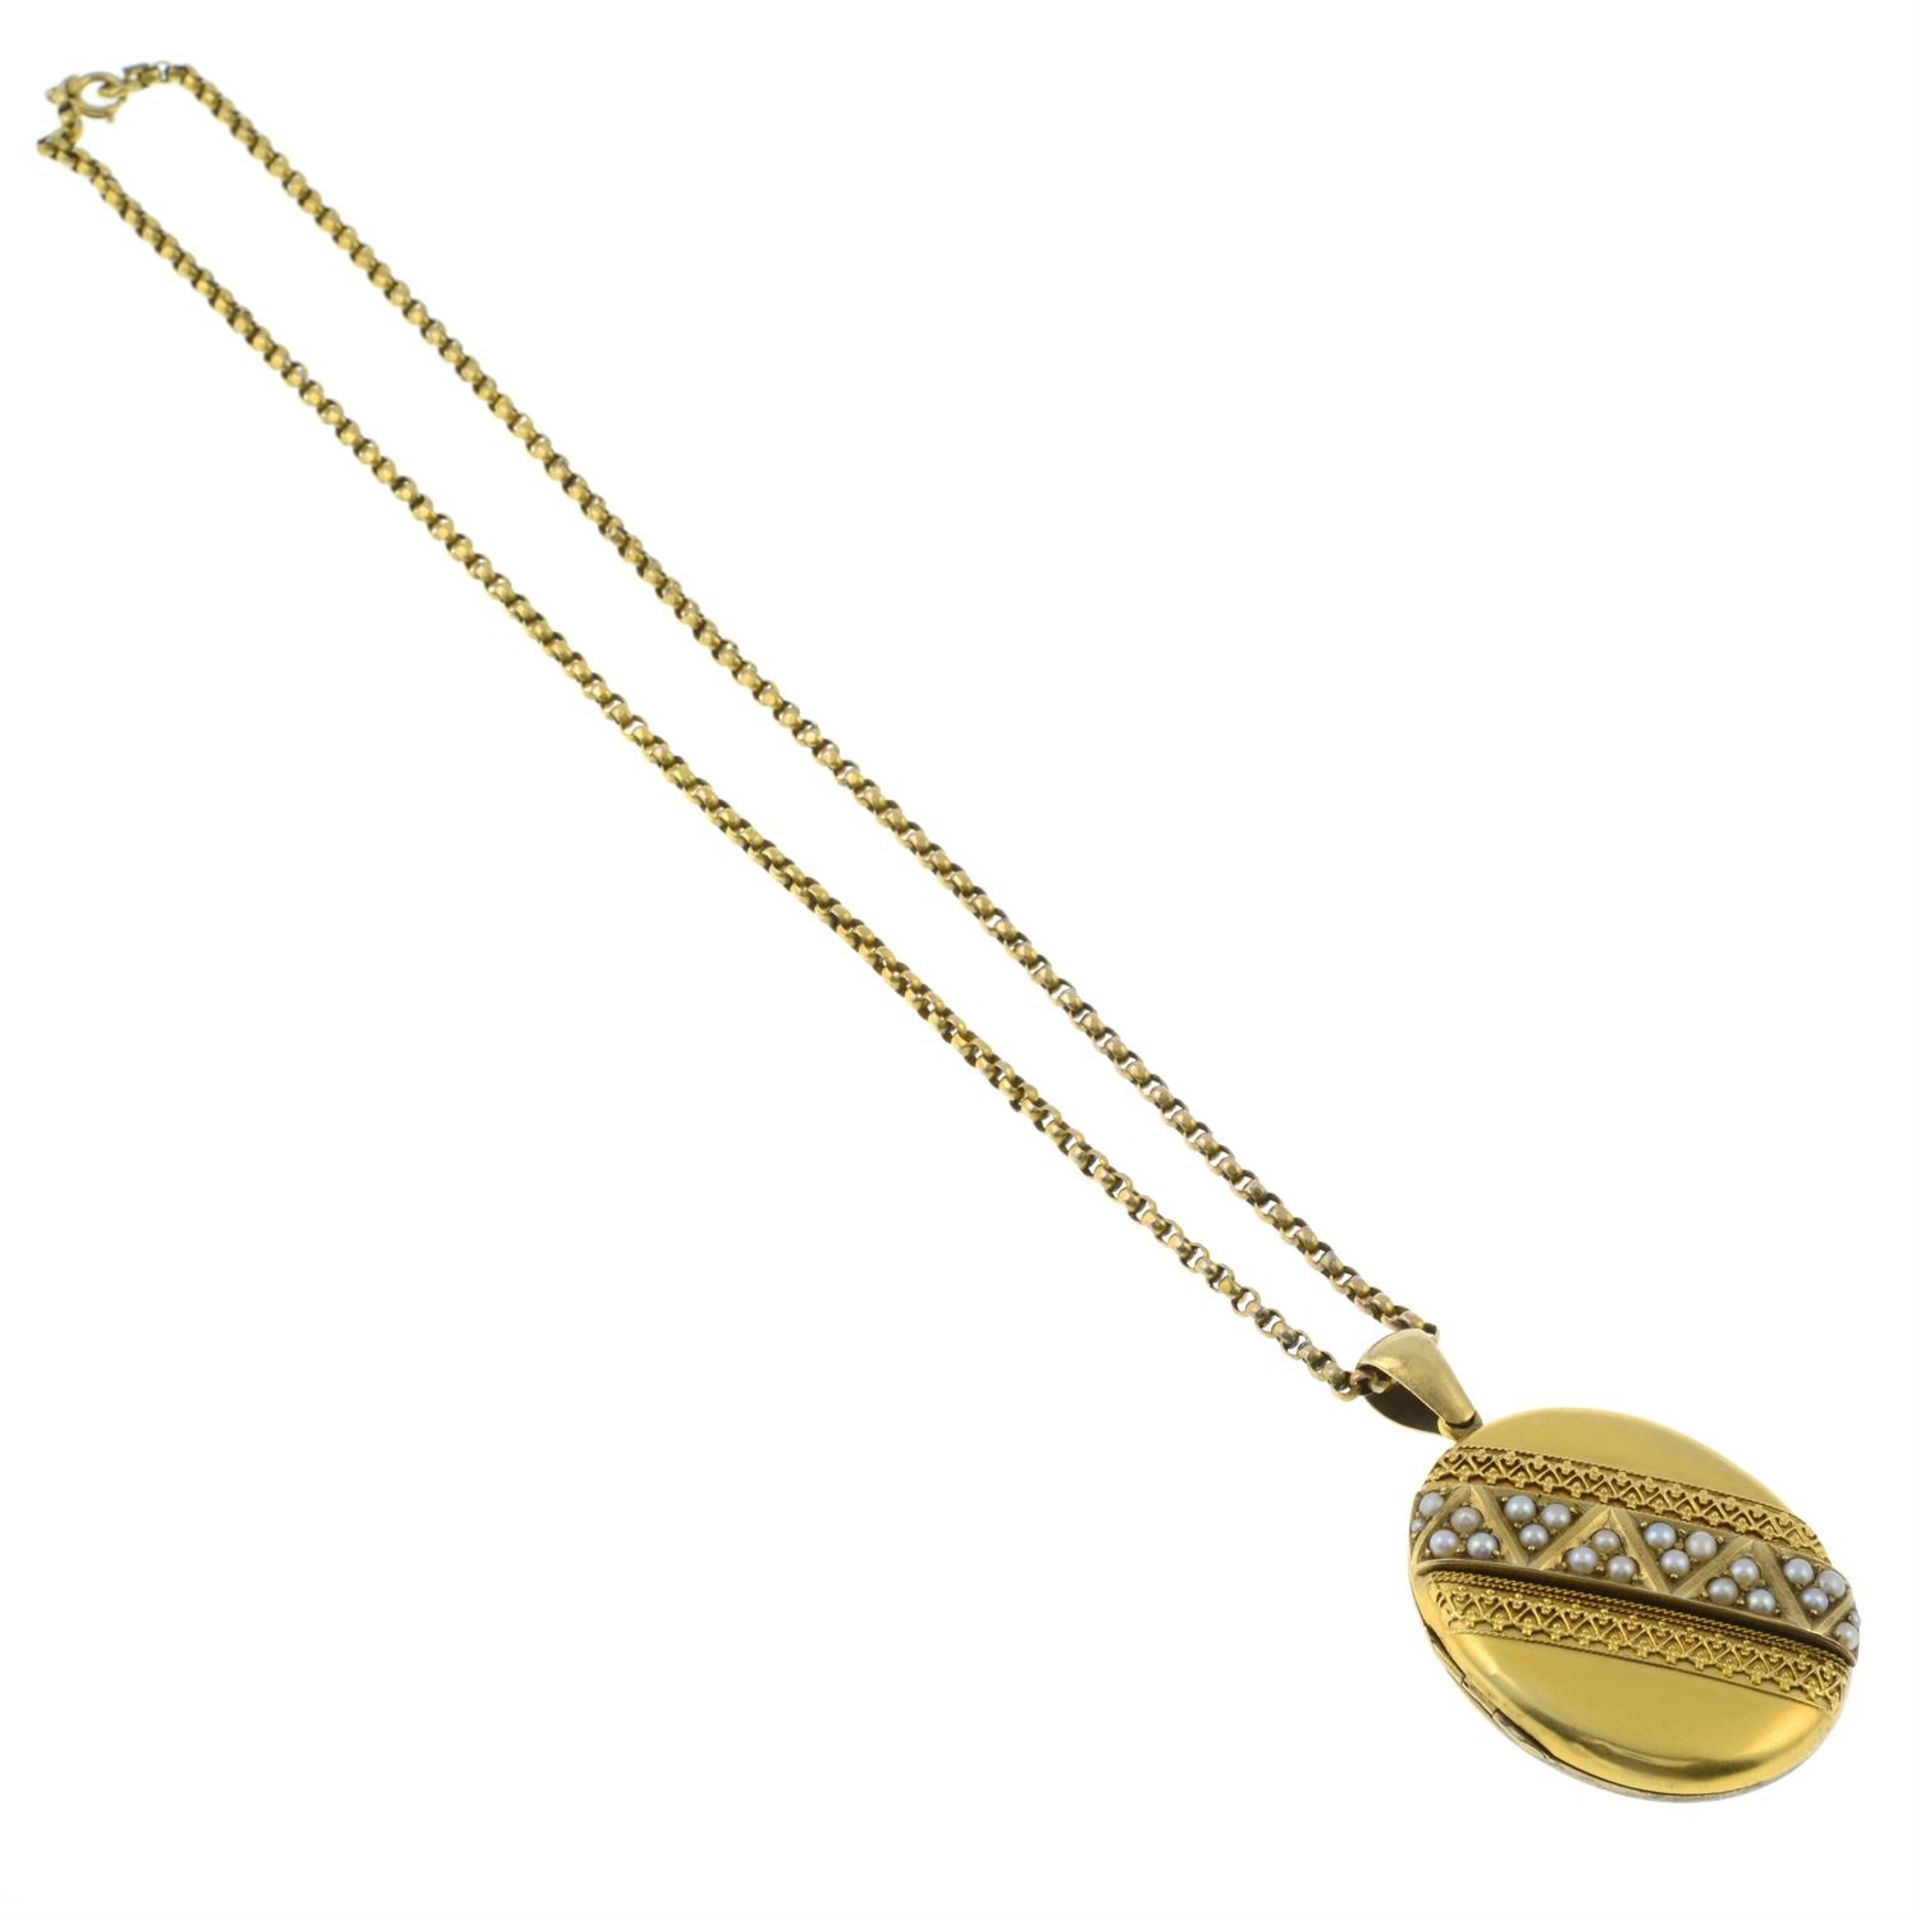 An early 20th century gold split pearl locket pendant, with chain. - Image 3 of 3